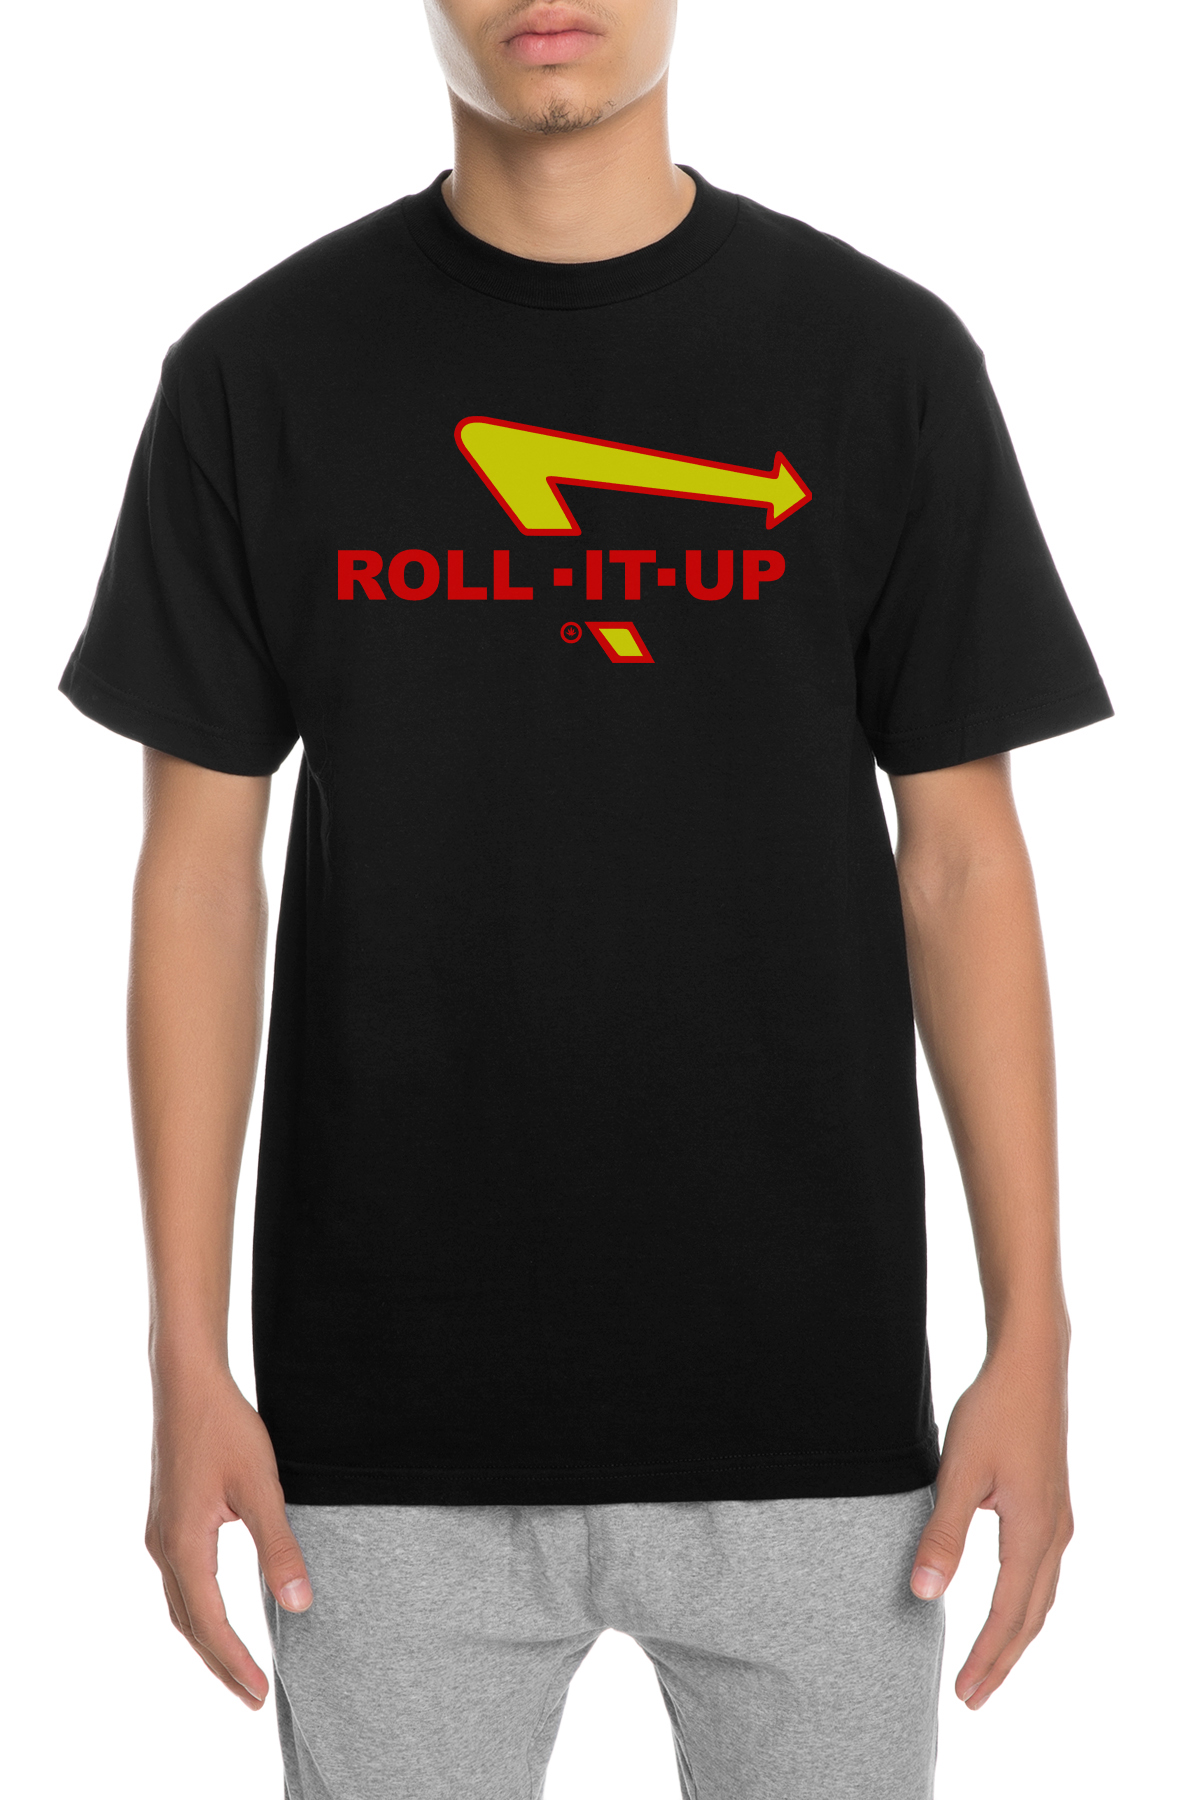 the roll it up tee